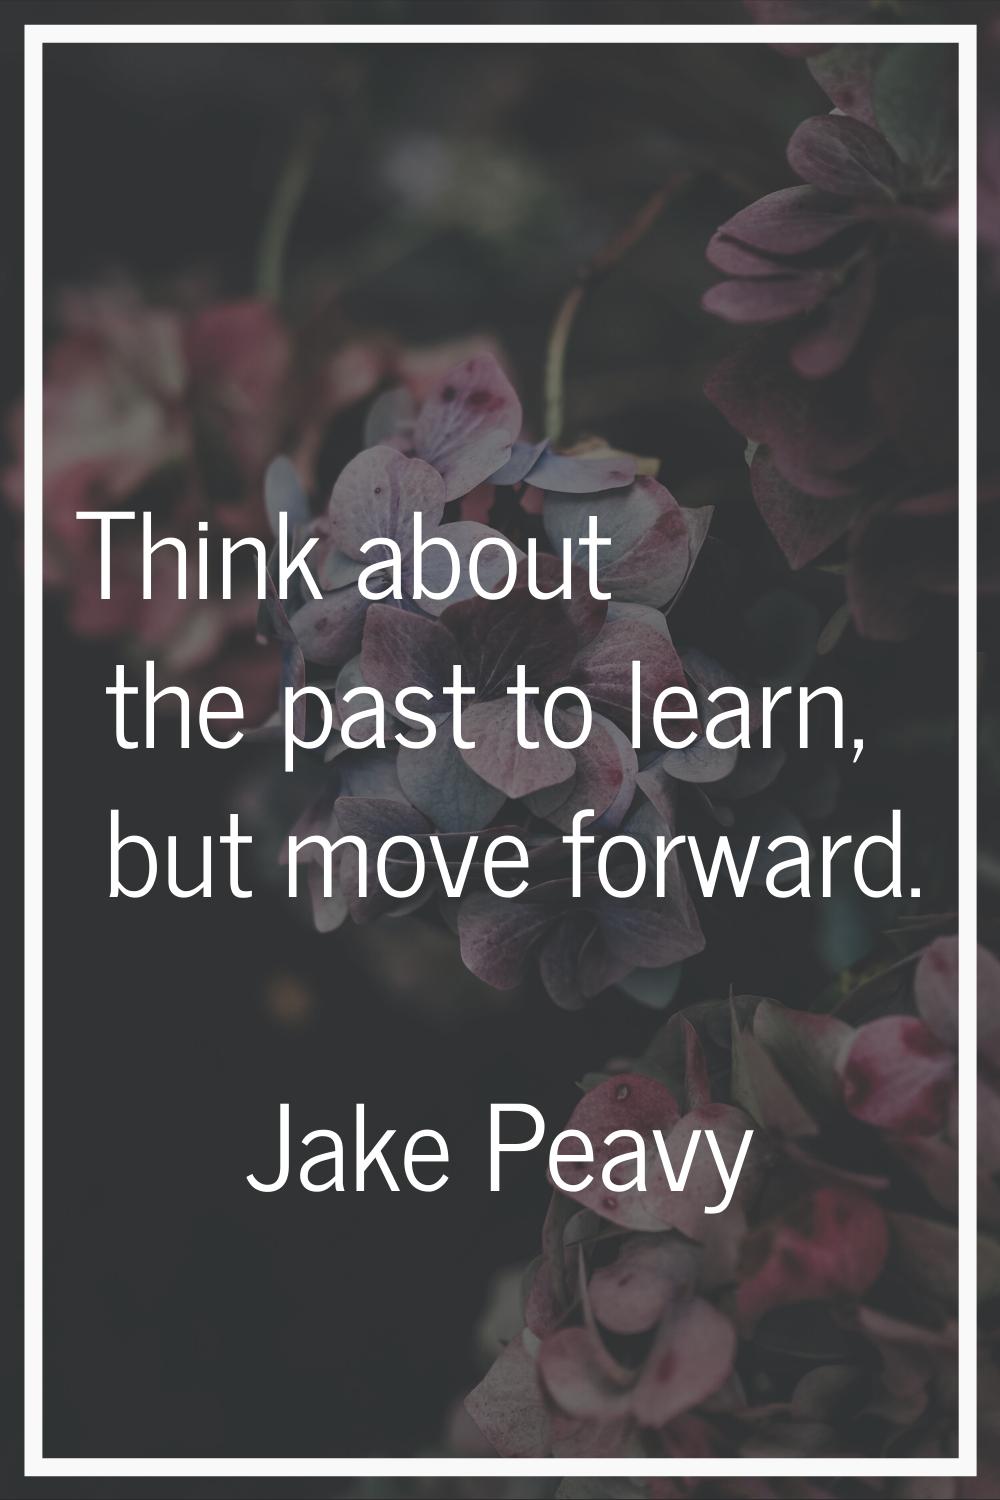 Think about the past to learn, but move forward.